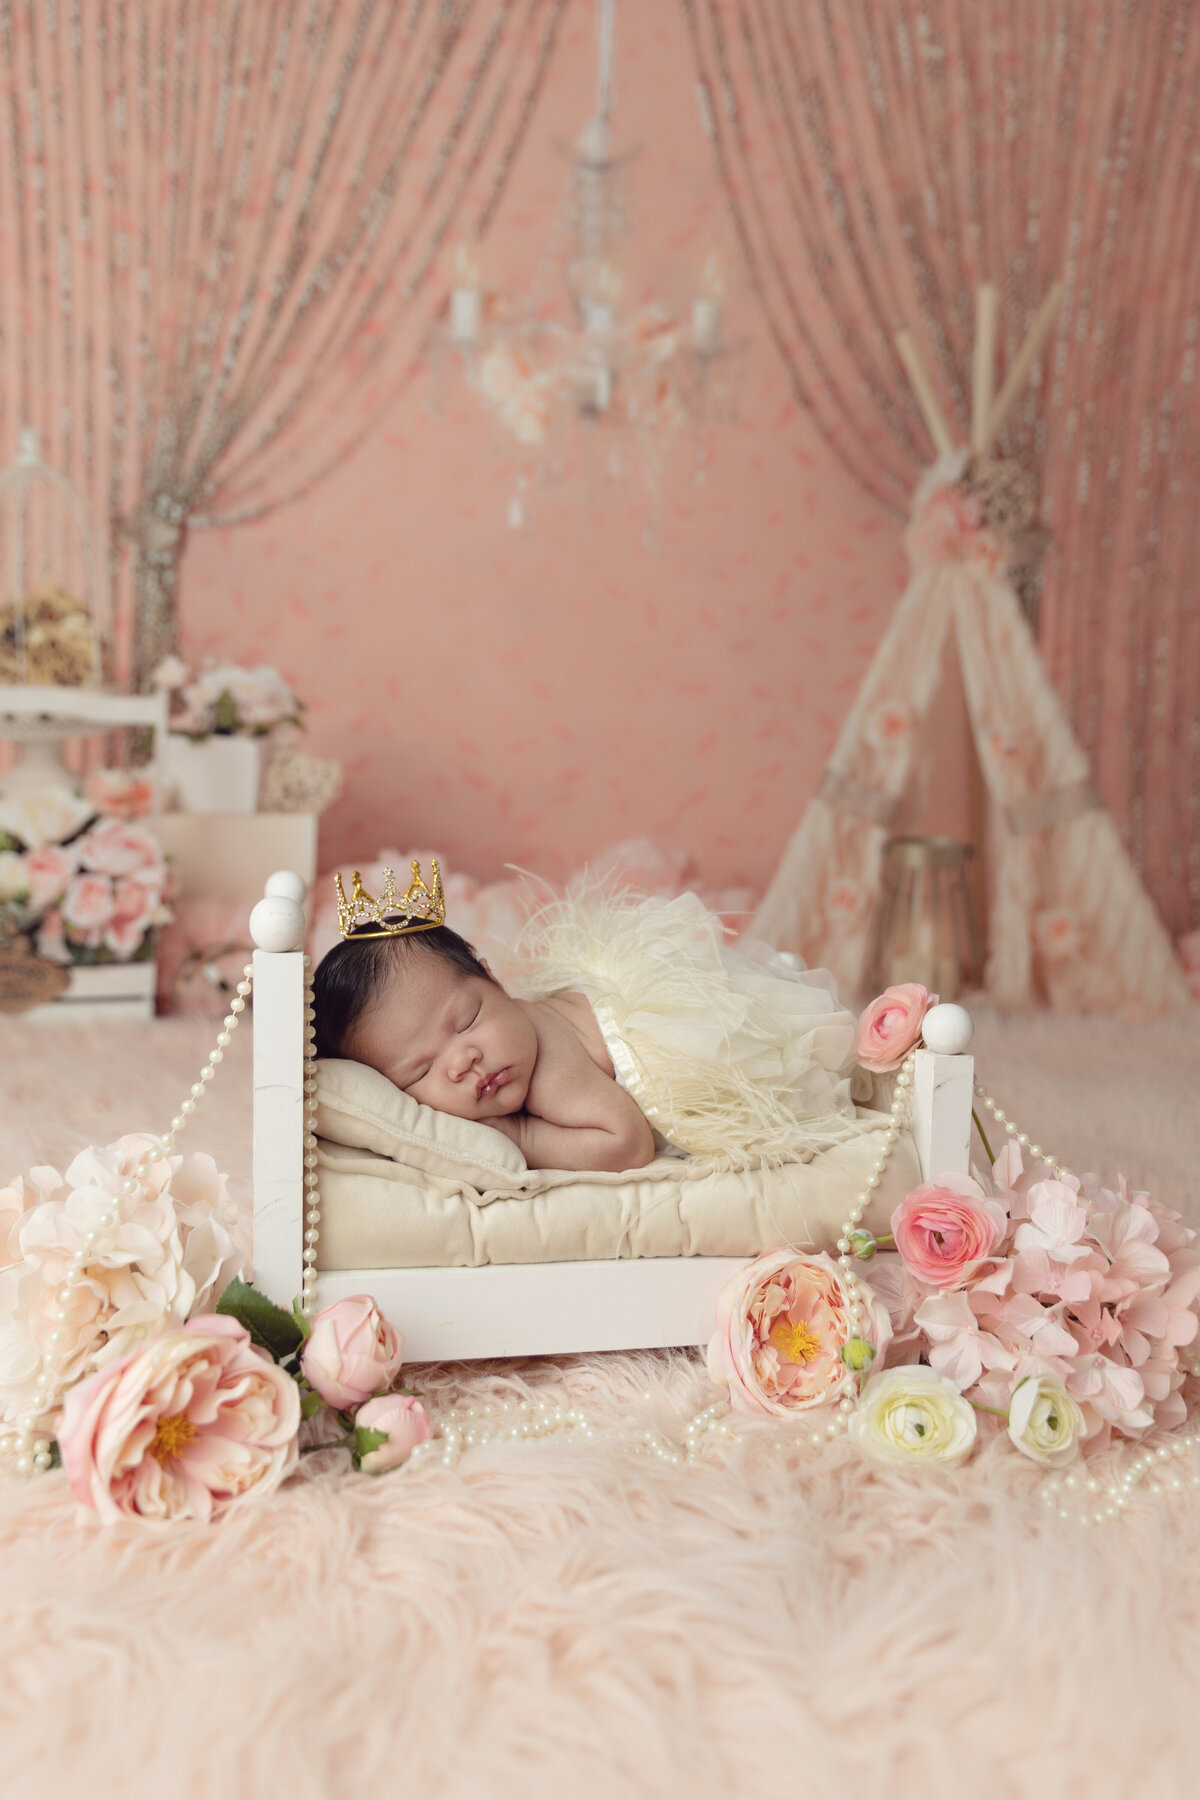 A newborn baby girl princess sleeps in a tiny white bed surrounded by flowers wearing a golden crown